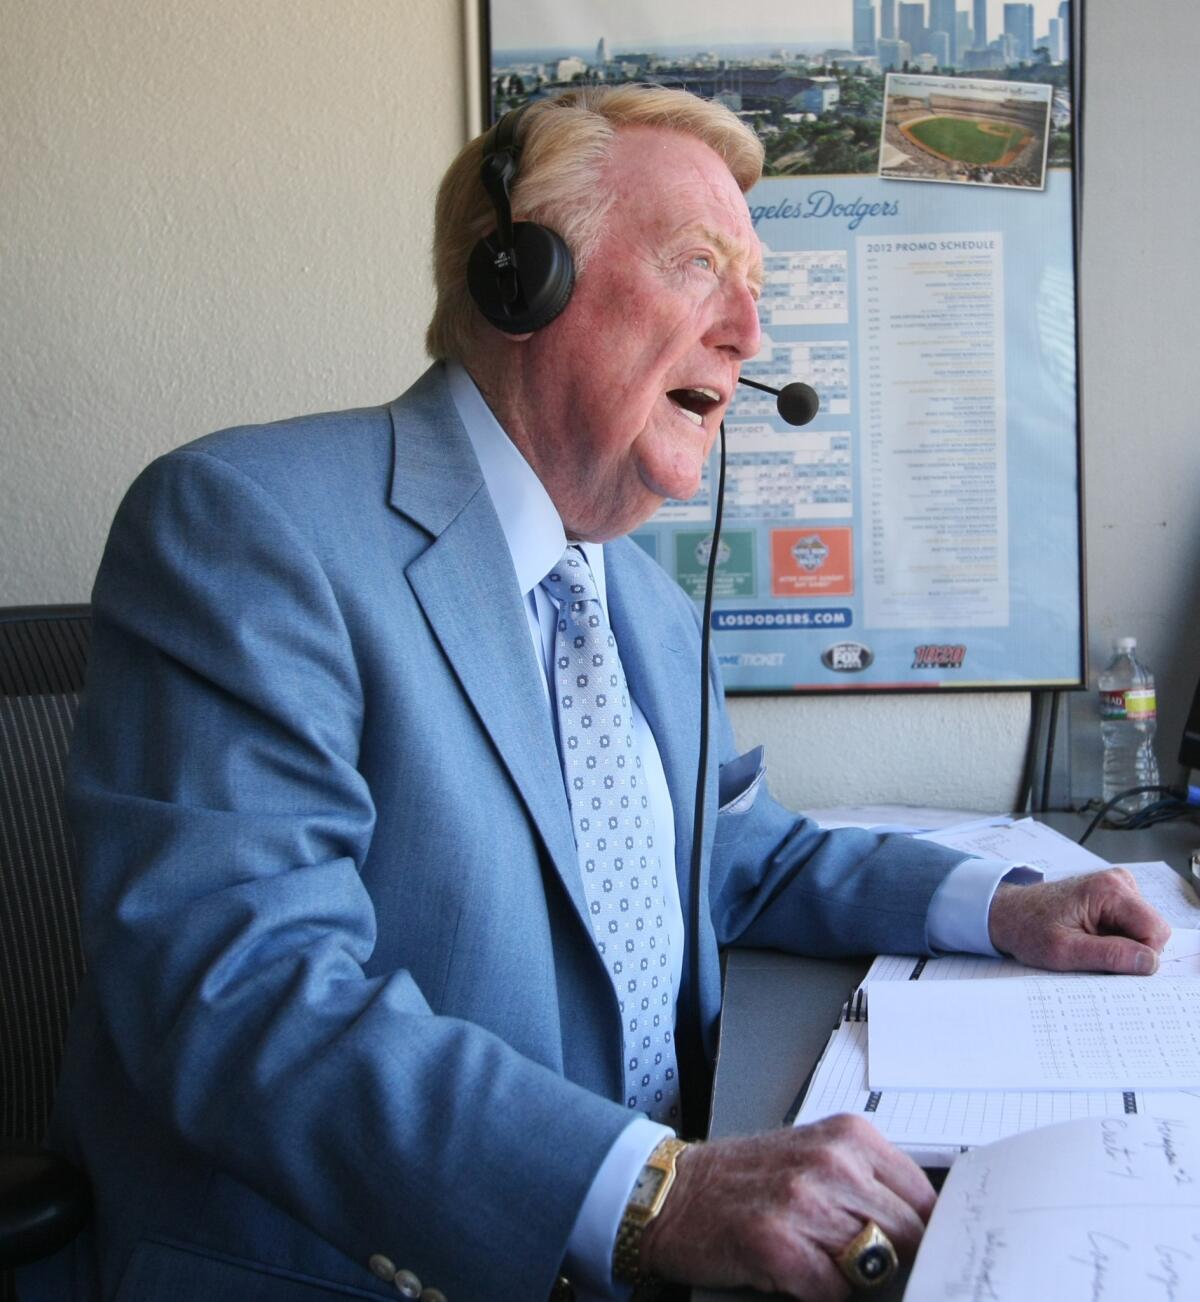 Dodgers broadcaster Vin Scully says he would "hate to see a game where there wasn't any emotion."